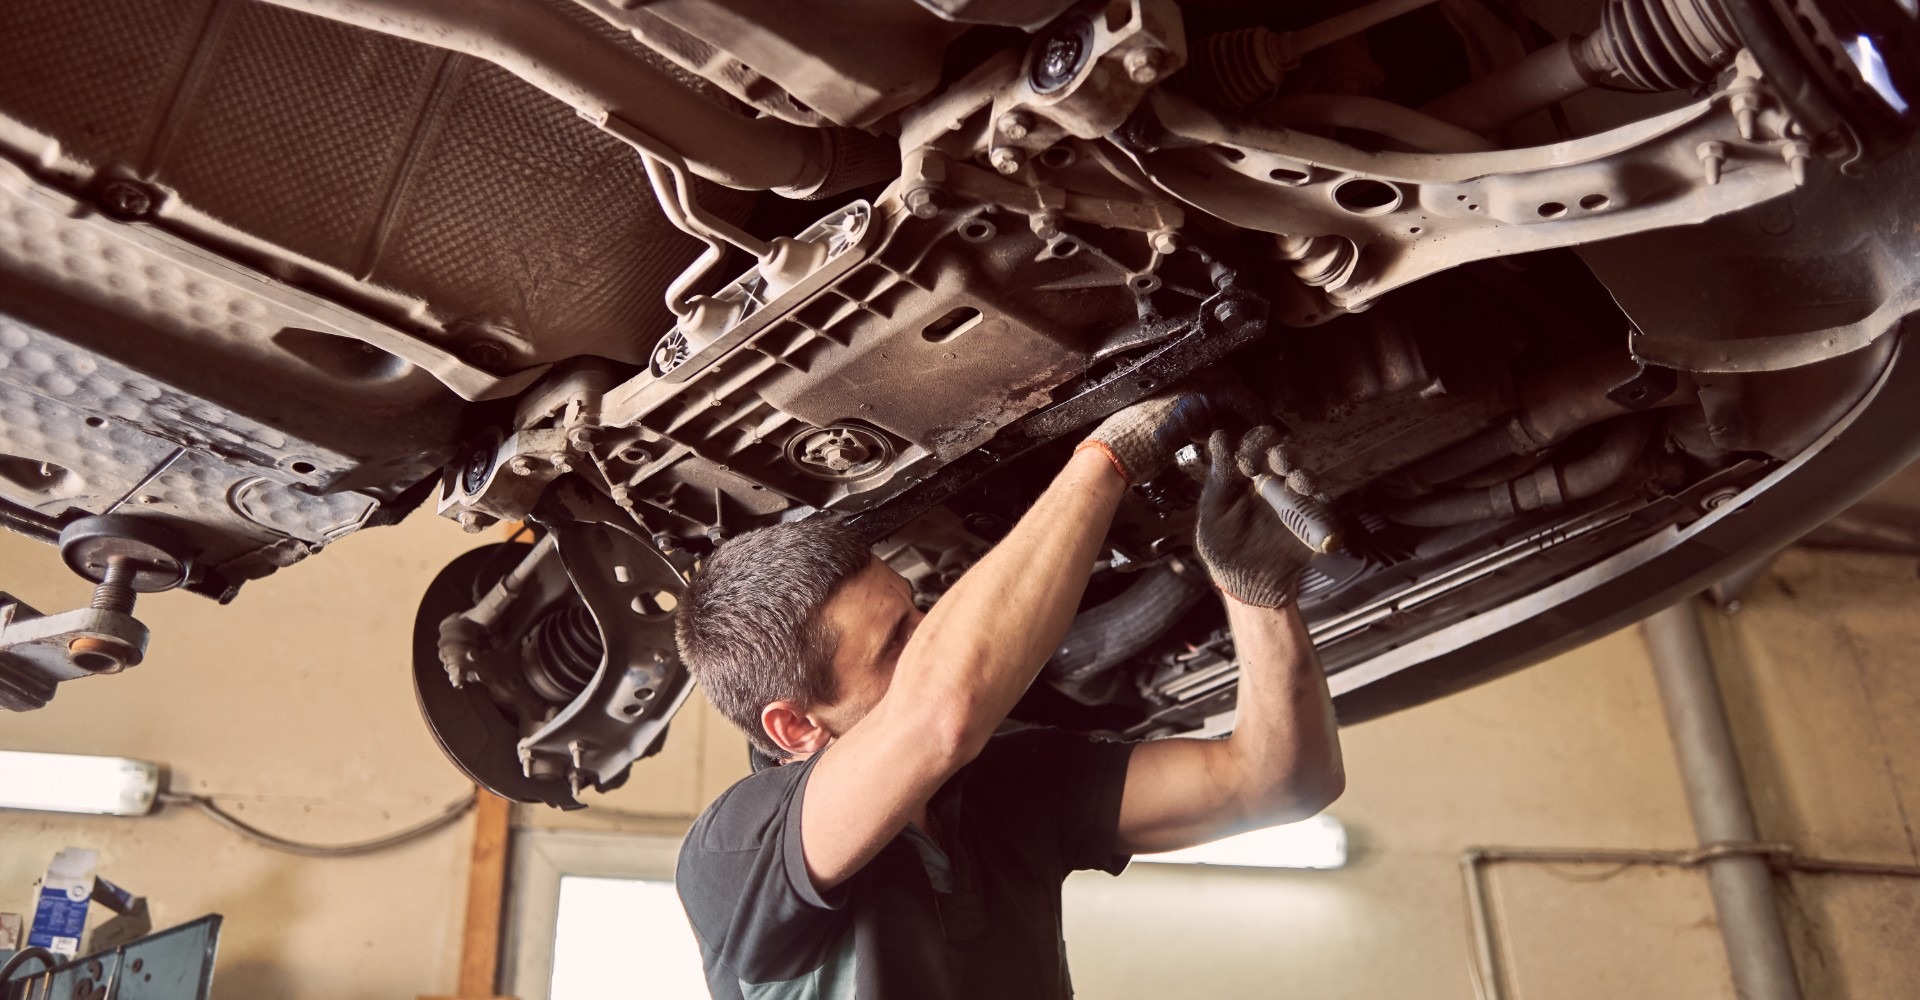 Factors that Affect the Time it Takes to Repair a Car